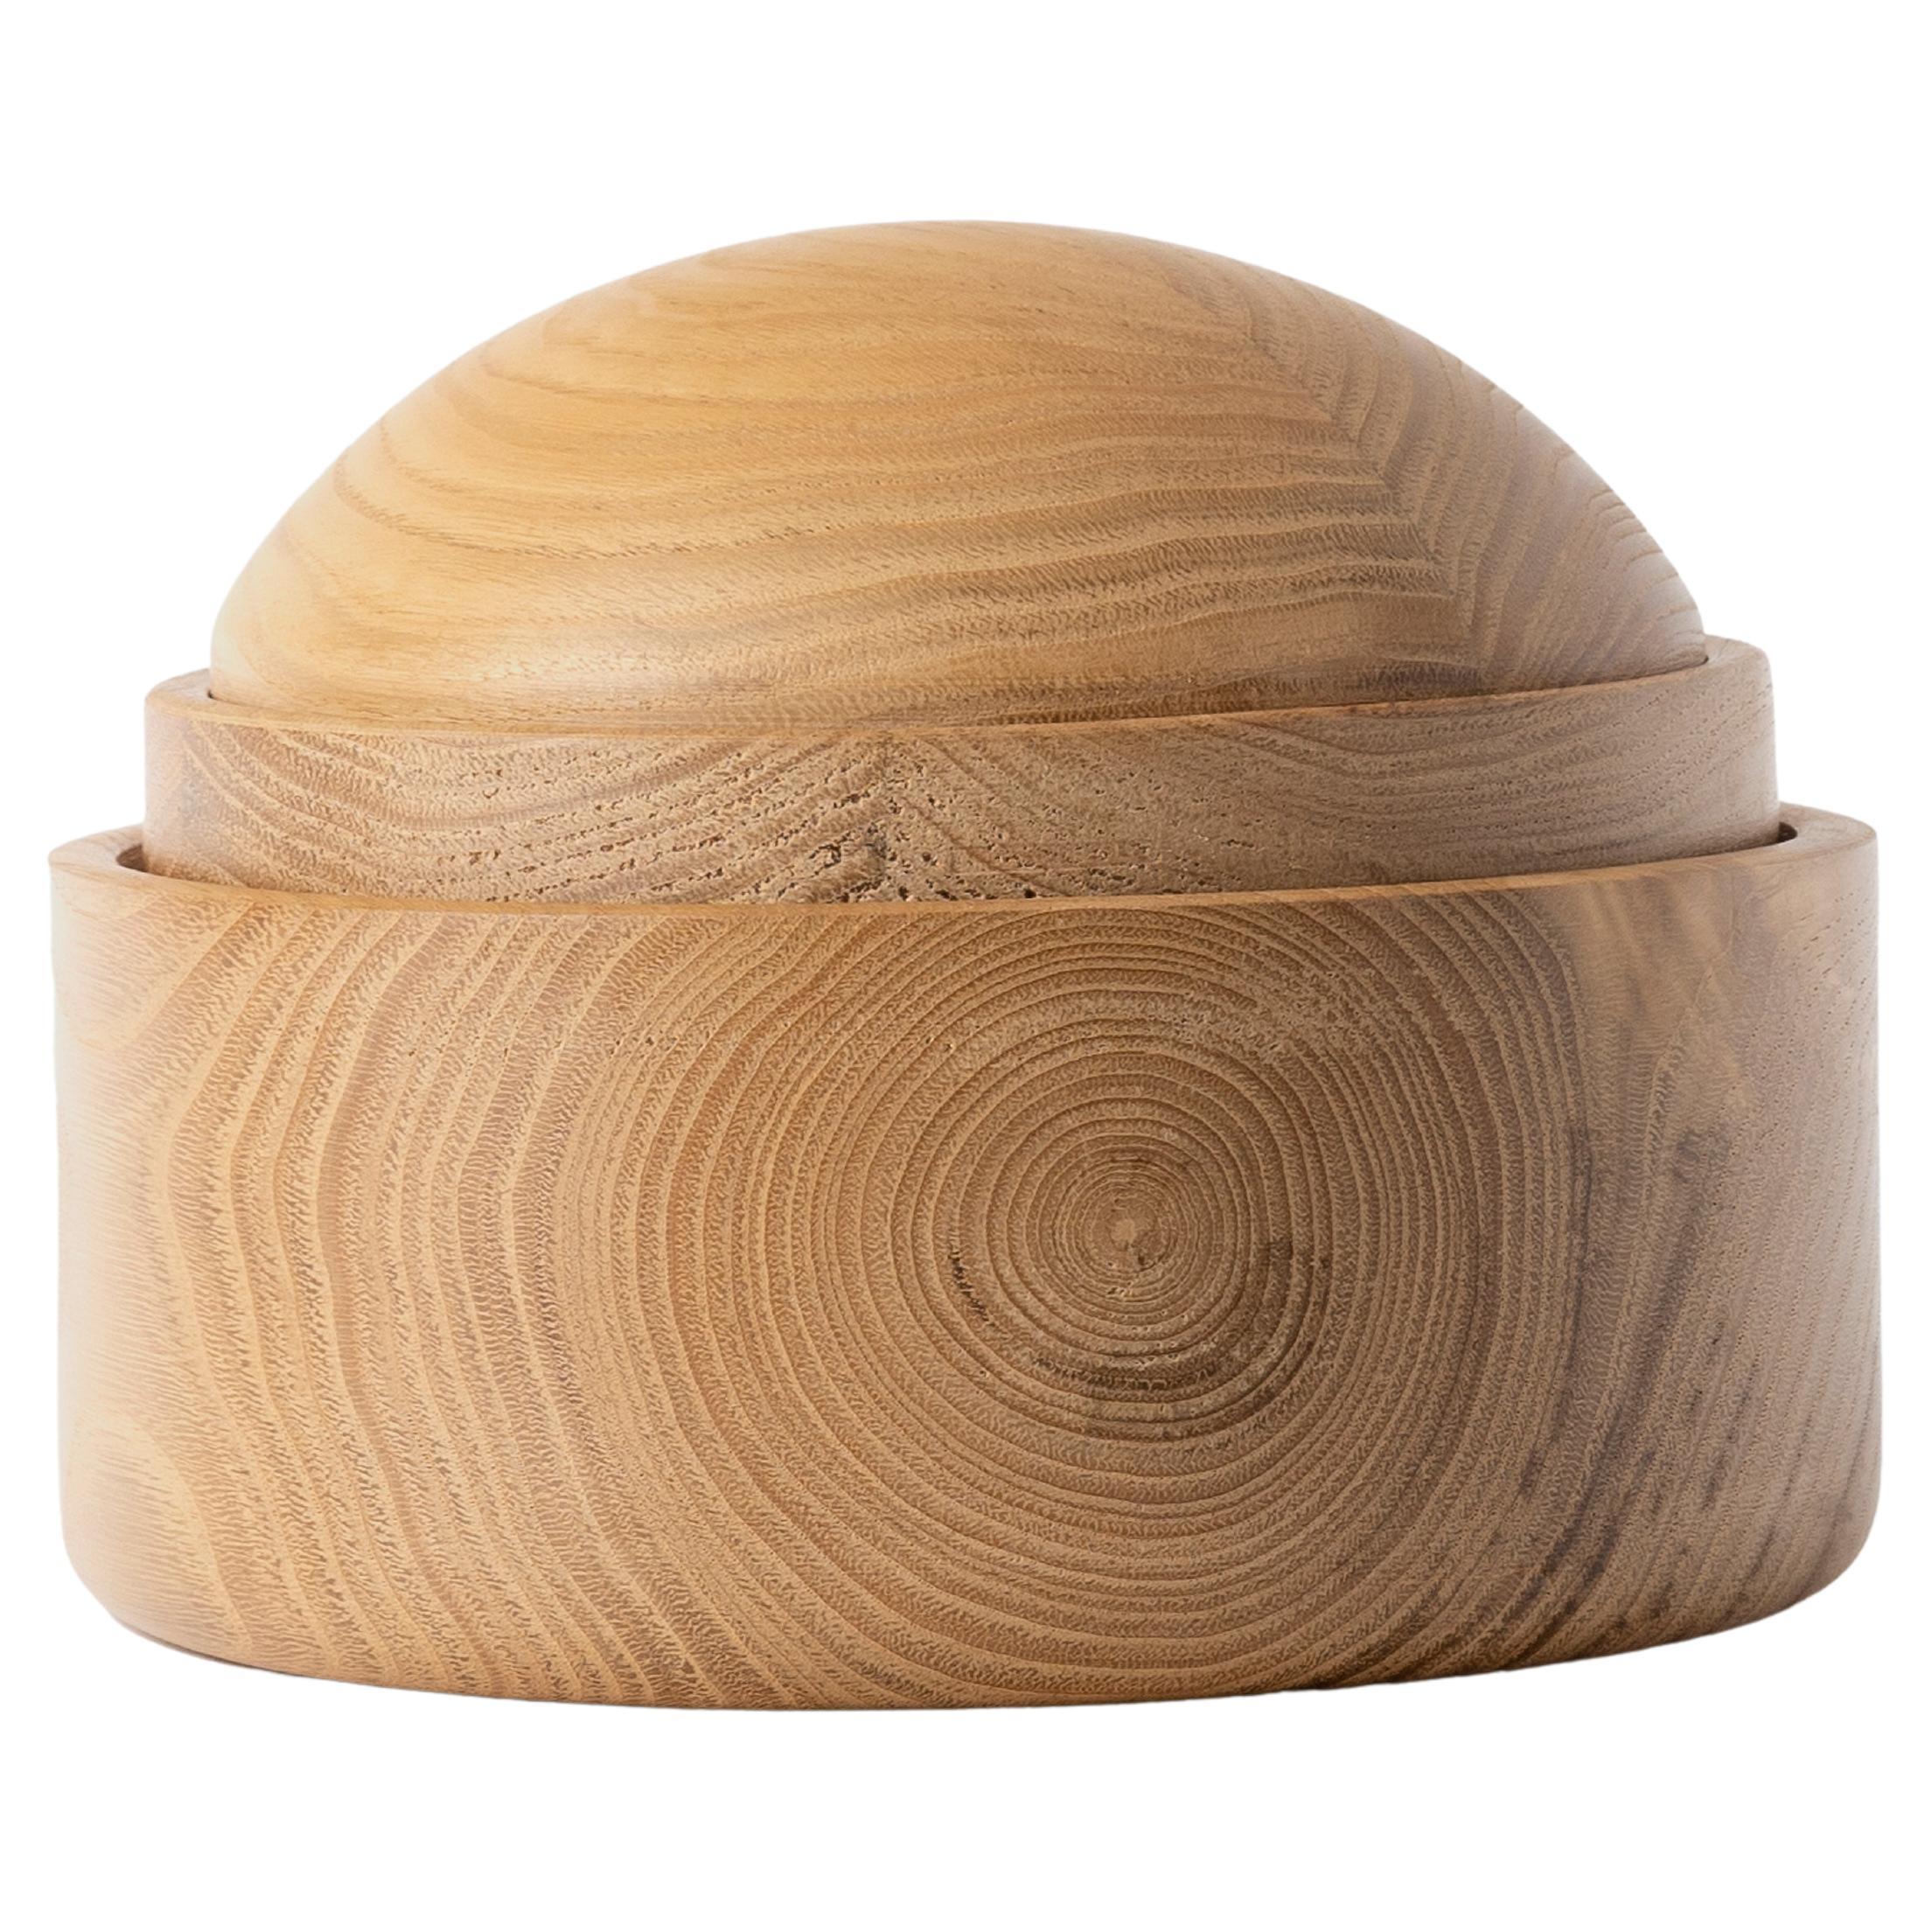 Contemporary Modern, Aya Chestnut Wood 2-Compartment Box